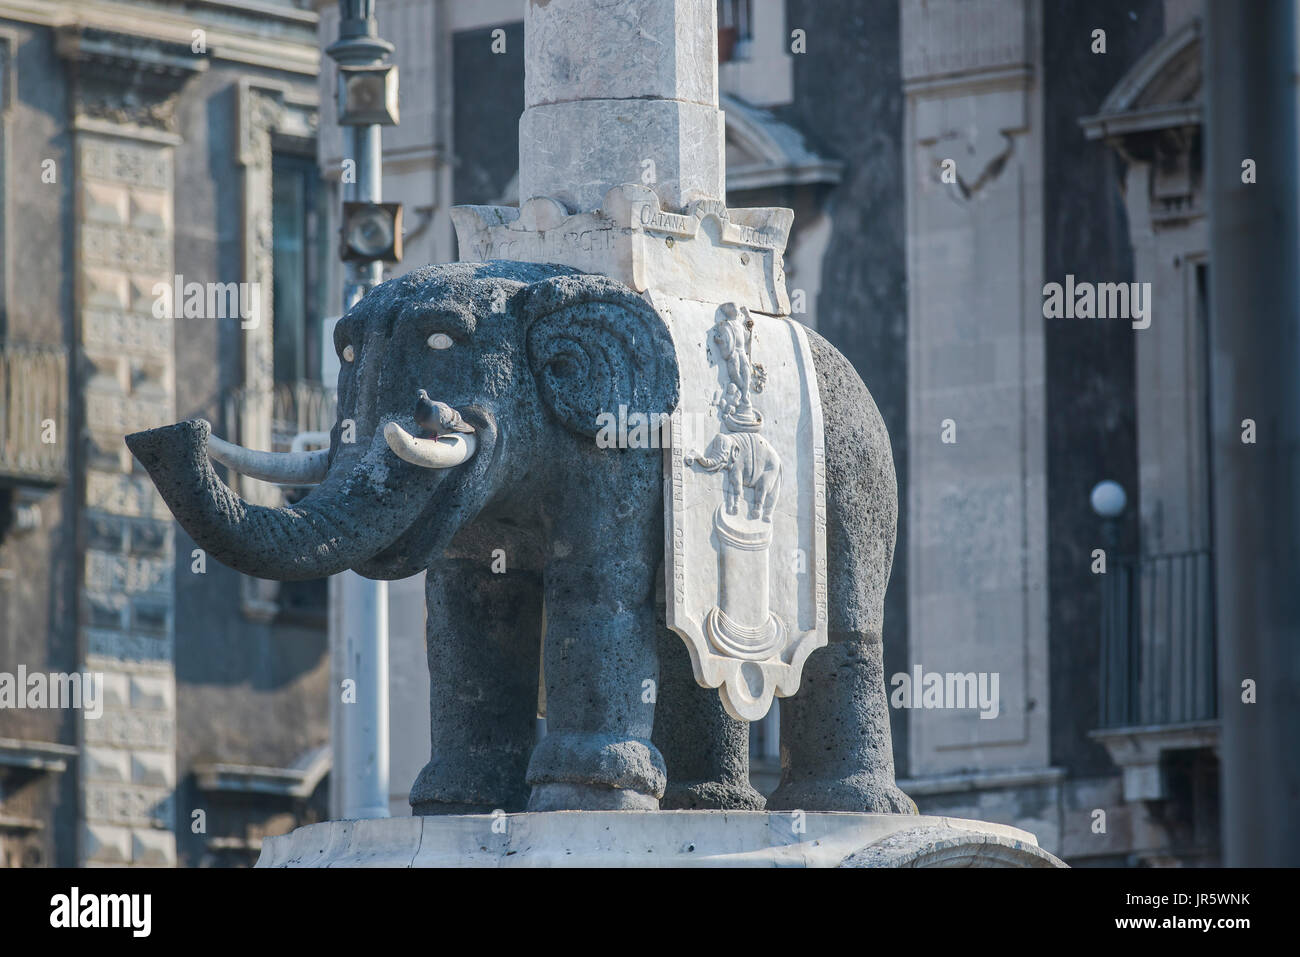 Catania Sicily elephant, view of the Liotru - a lava rock elephant supporting an Egyptian obelisk on its back in the Piazza del Duomo, Catania, Sicily Stock Photo